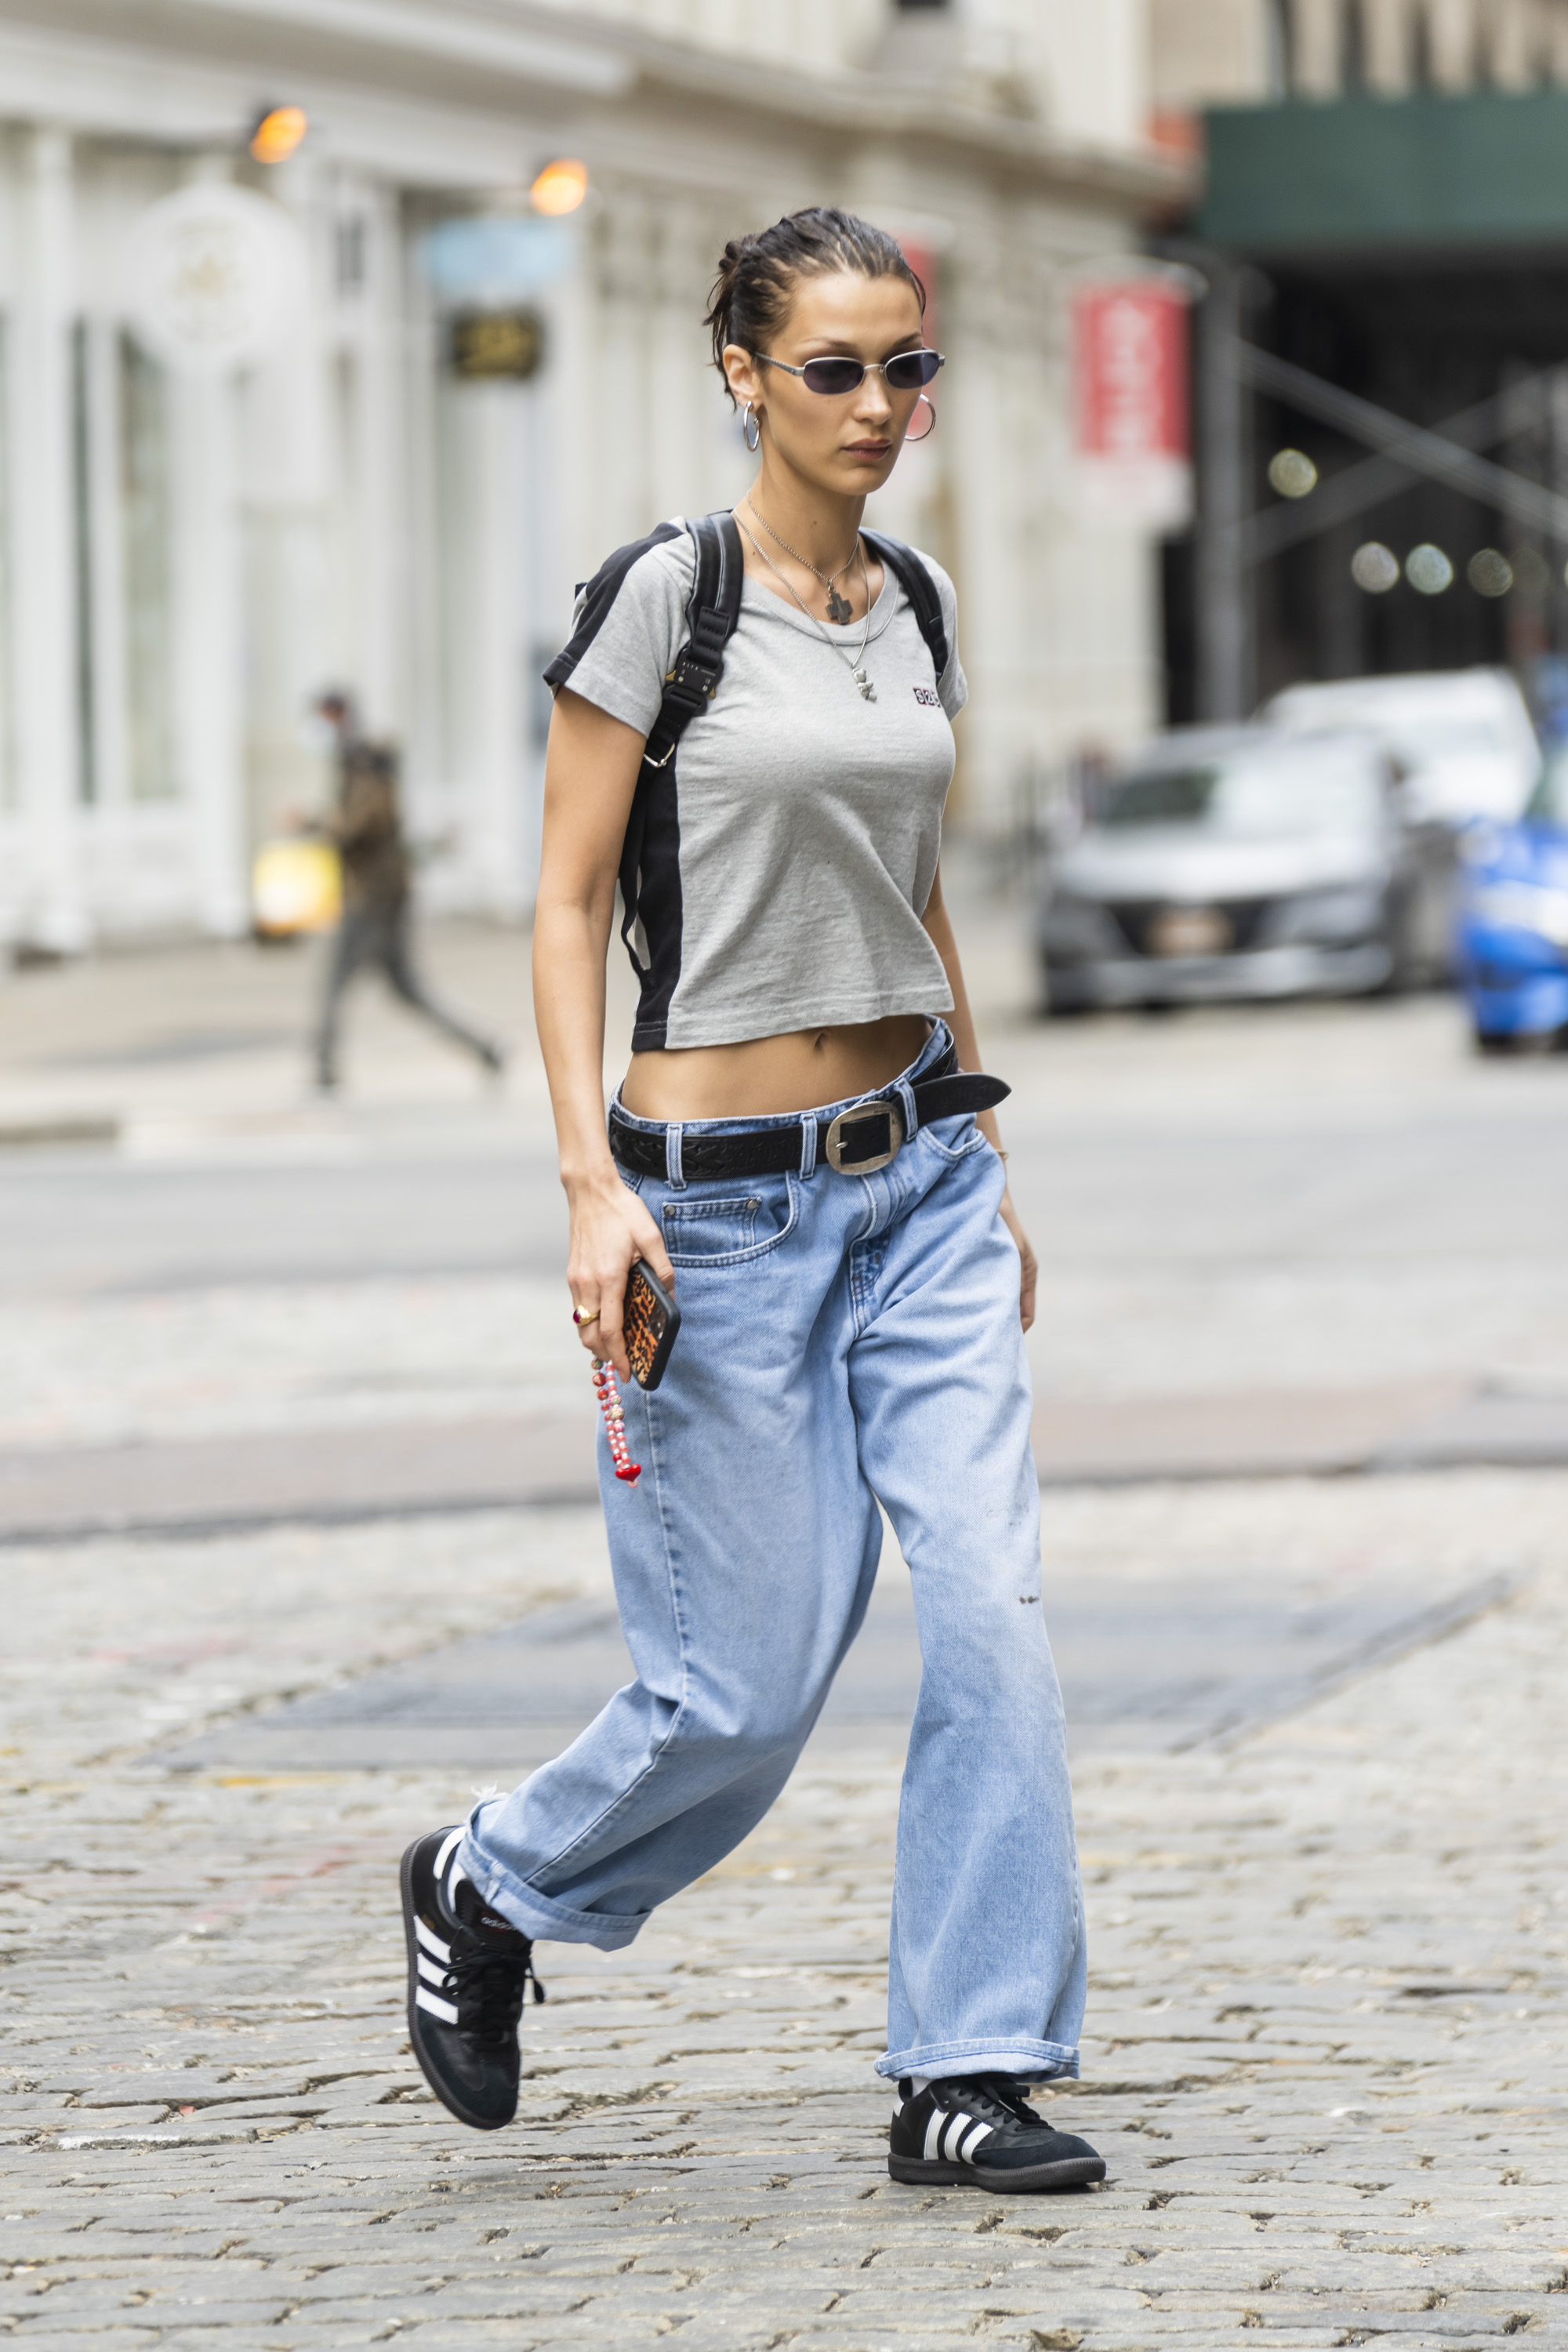 Bella Hadid is seen in NoHo on April 24, 2022 in New York City